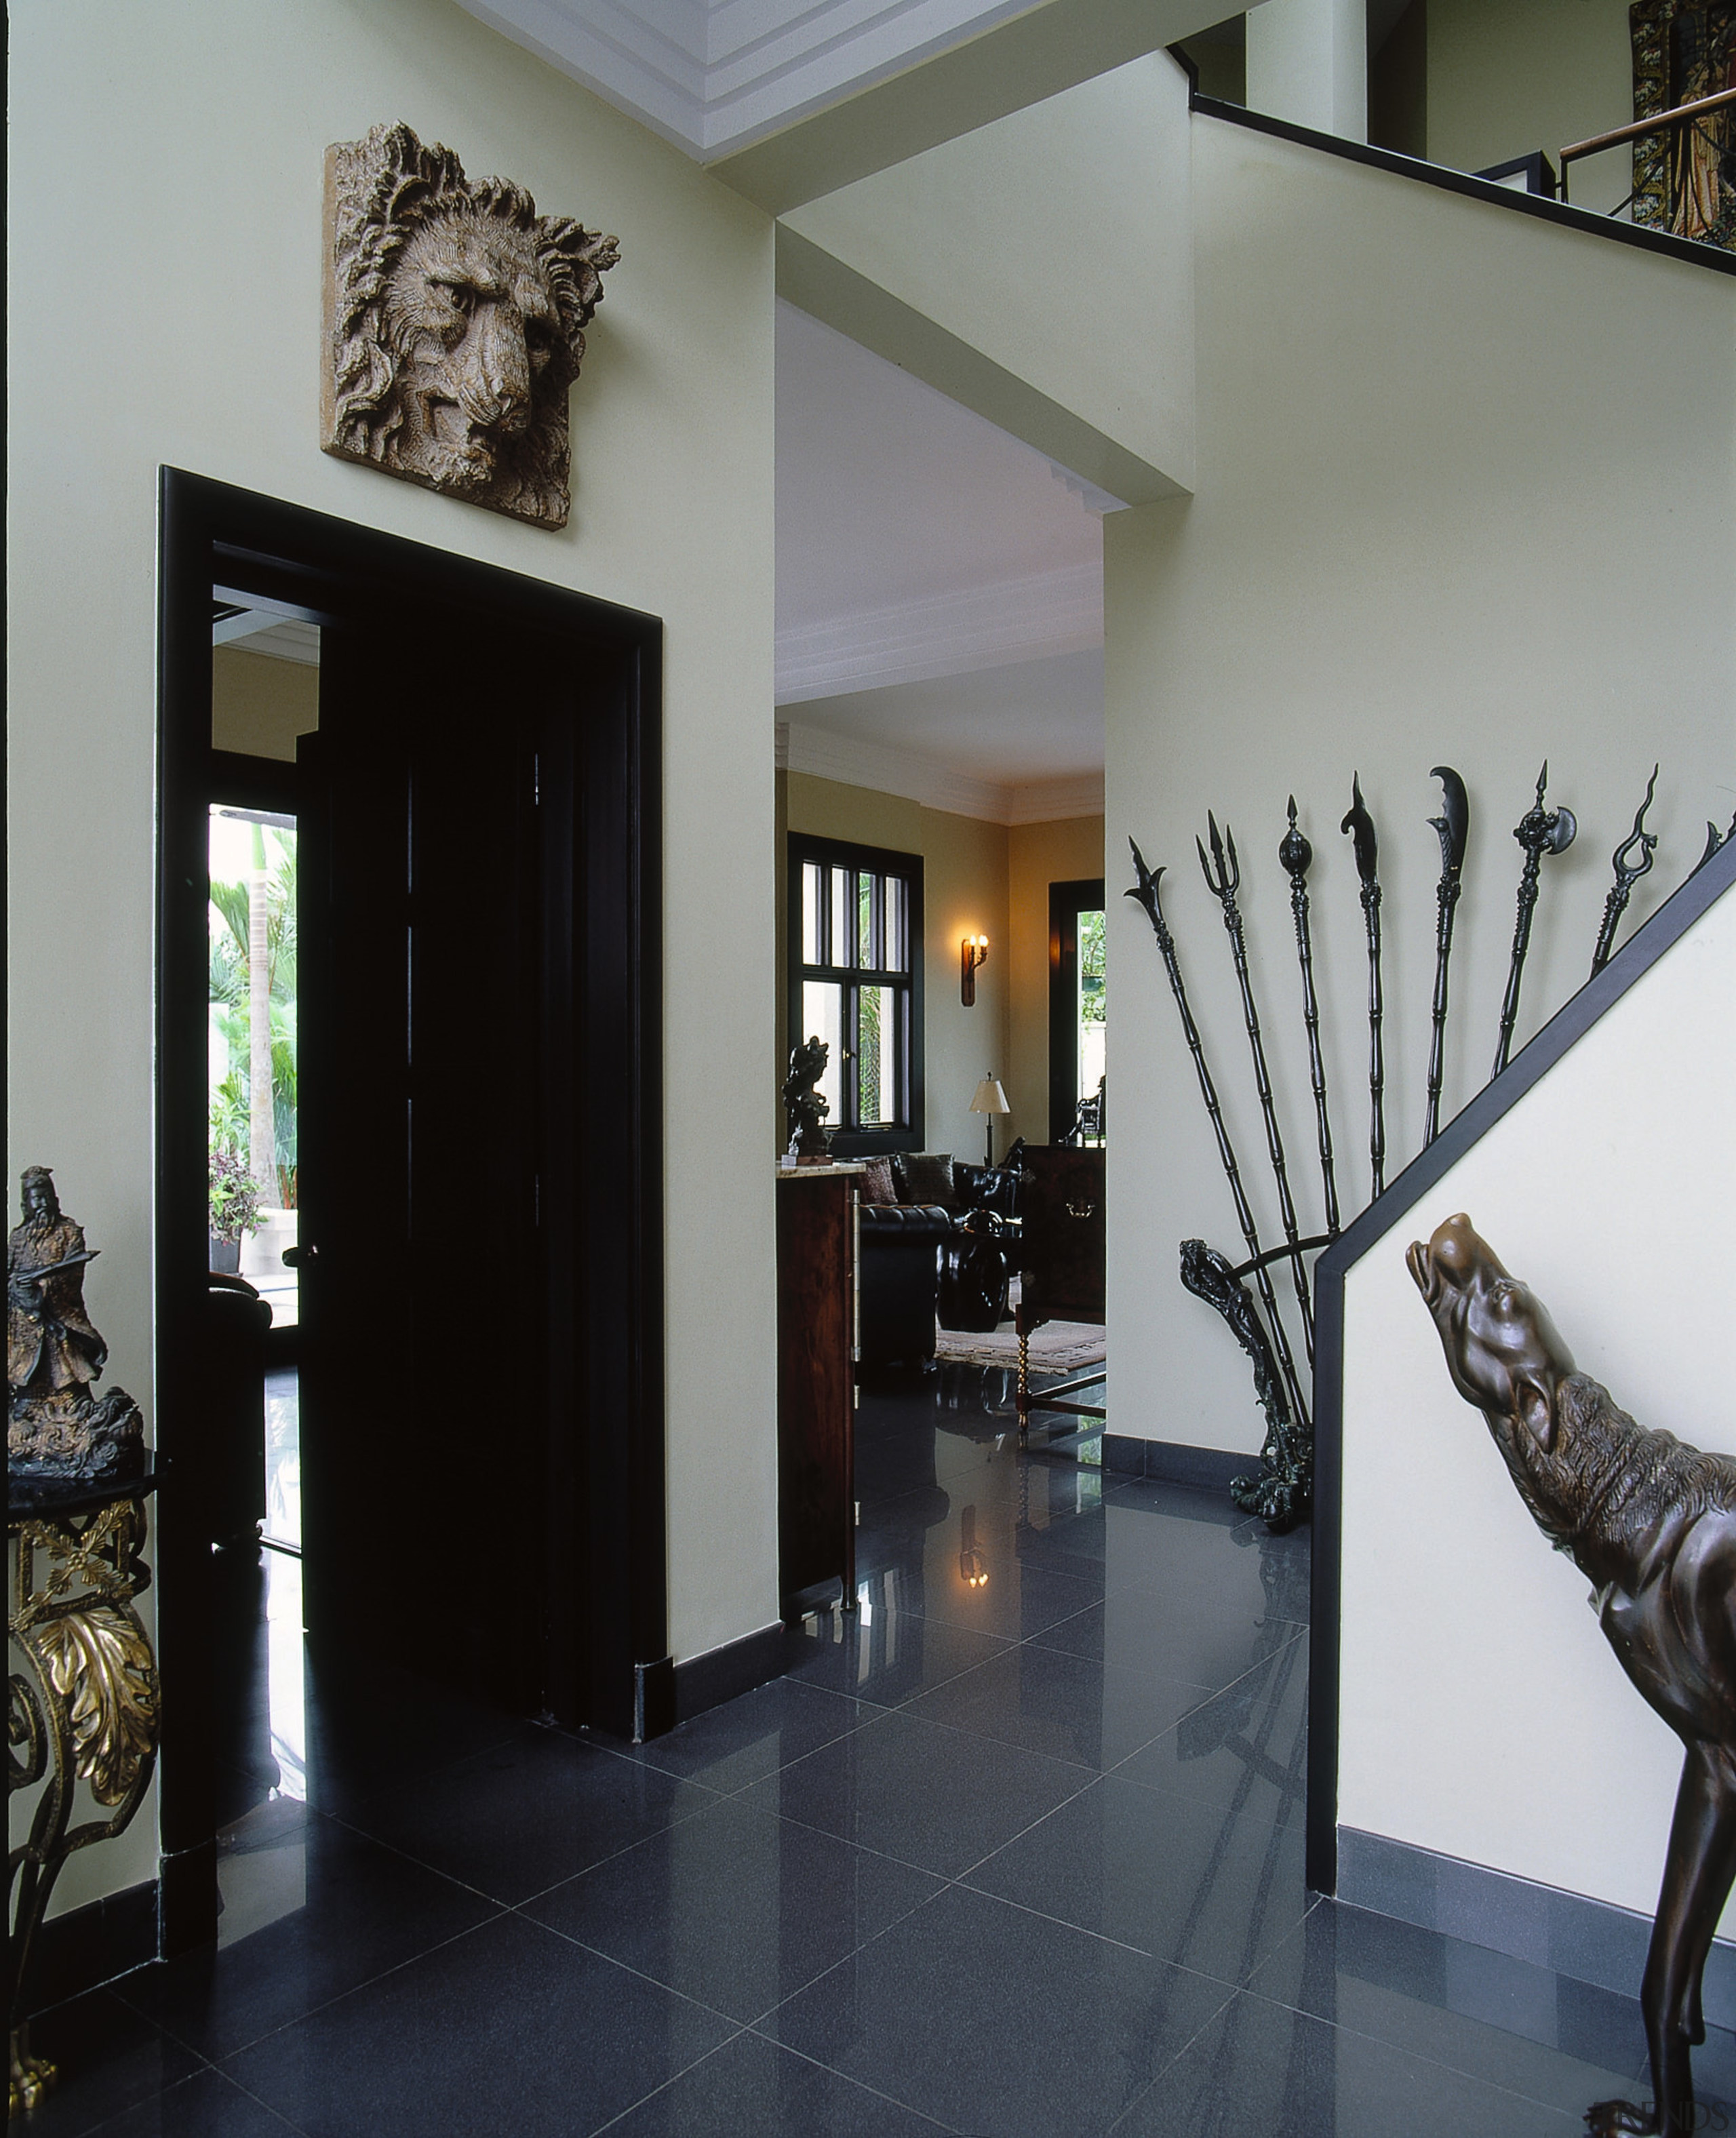 Close up view of the entrance way to ceiling, floor, flooring, interior design, lobby, property, stairs, gray, black